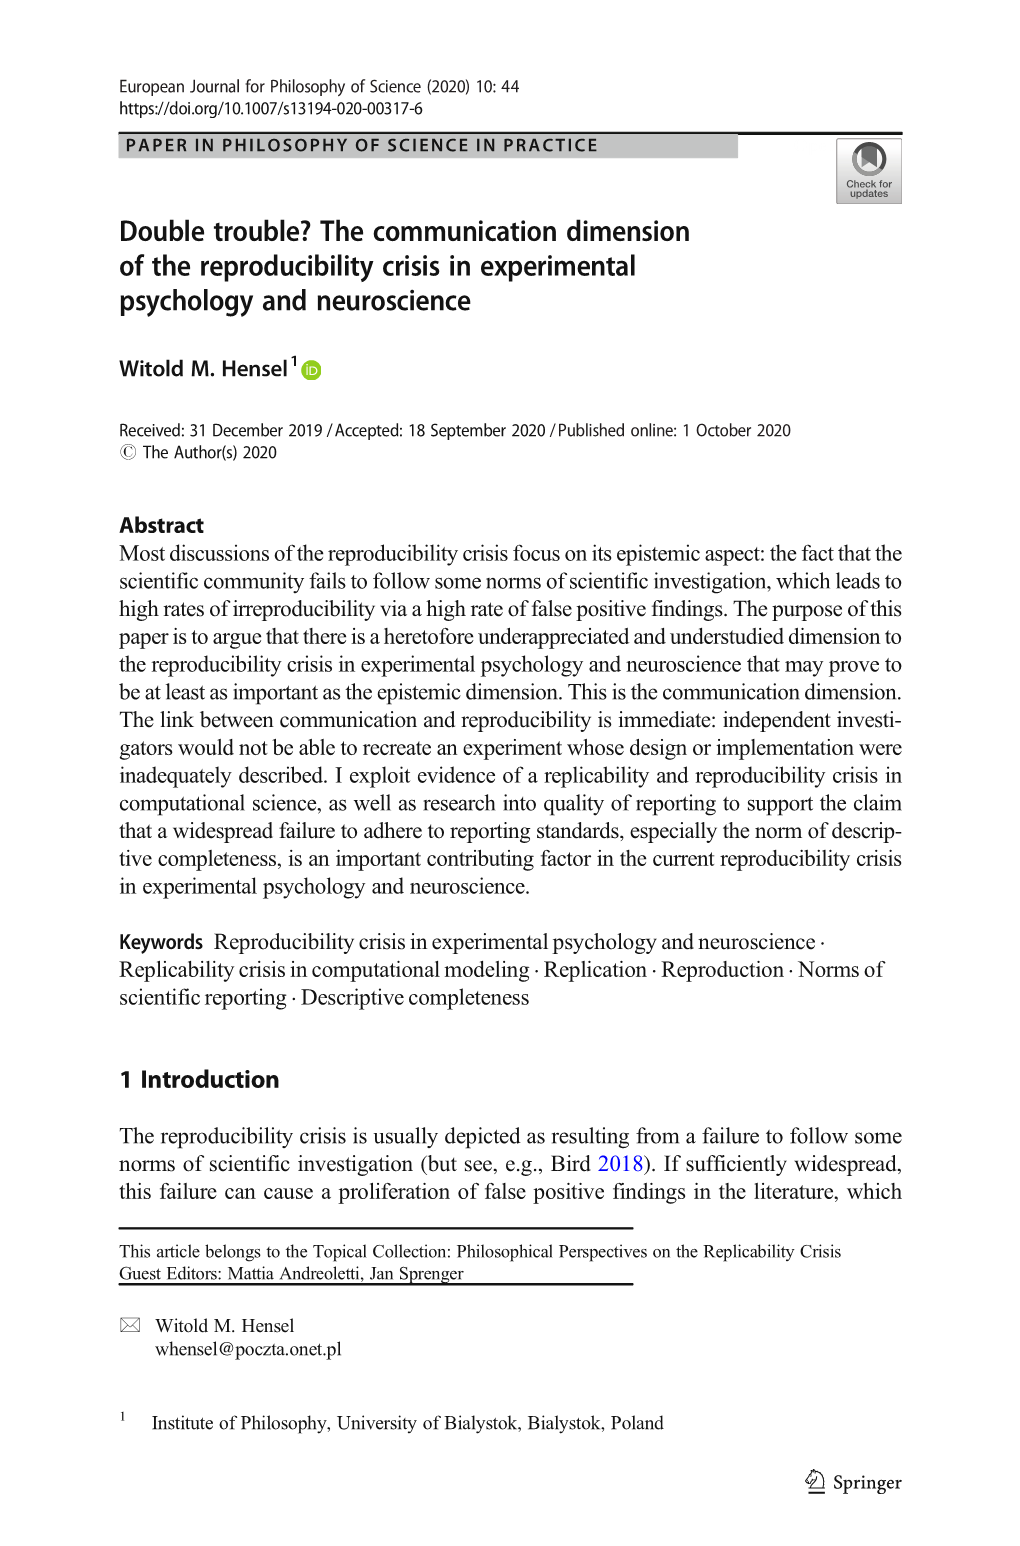 The Communication Dimension of the Reproducibility Crisis in Experimental Psychology and Neuroscience